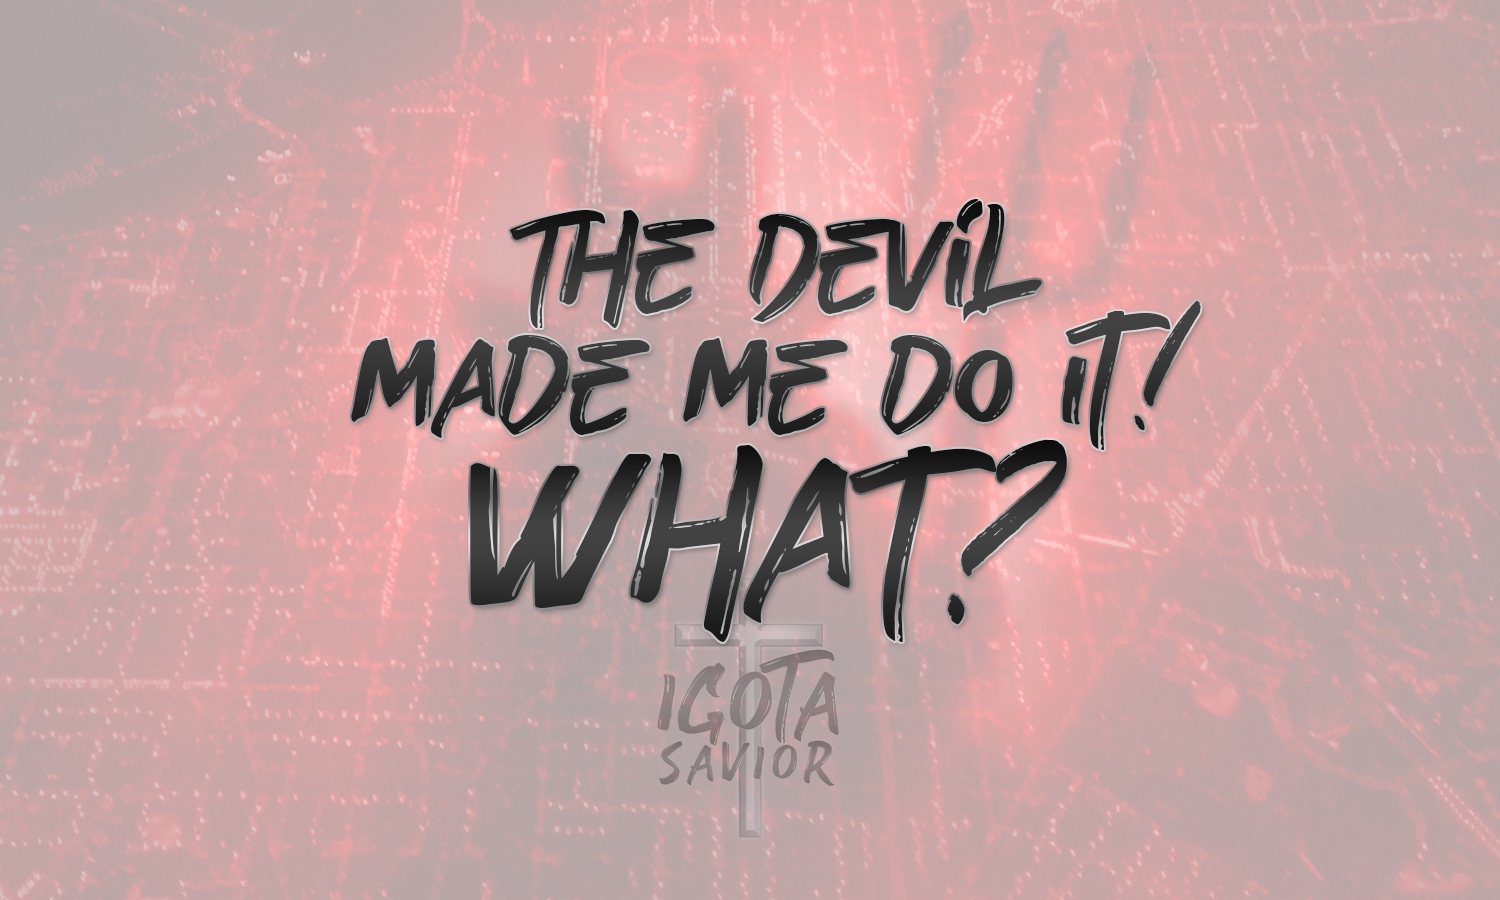 The Devil Made Me Do It! WHAT?